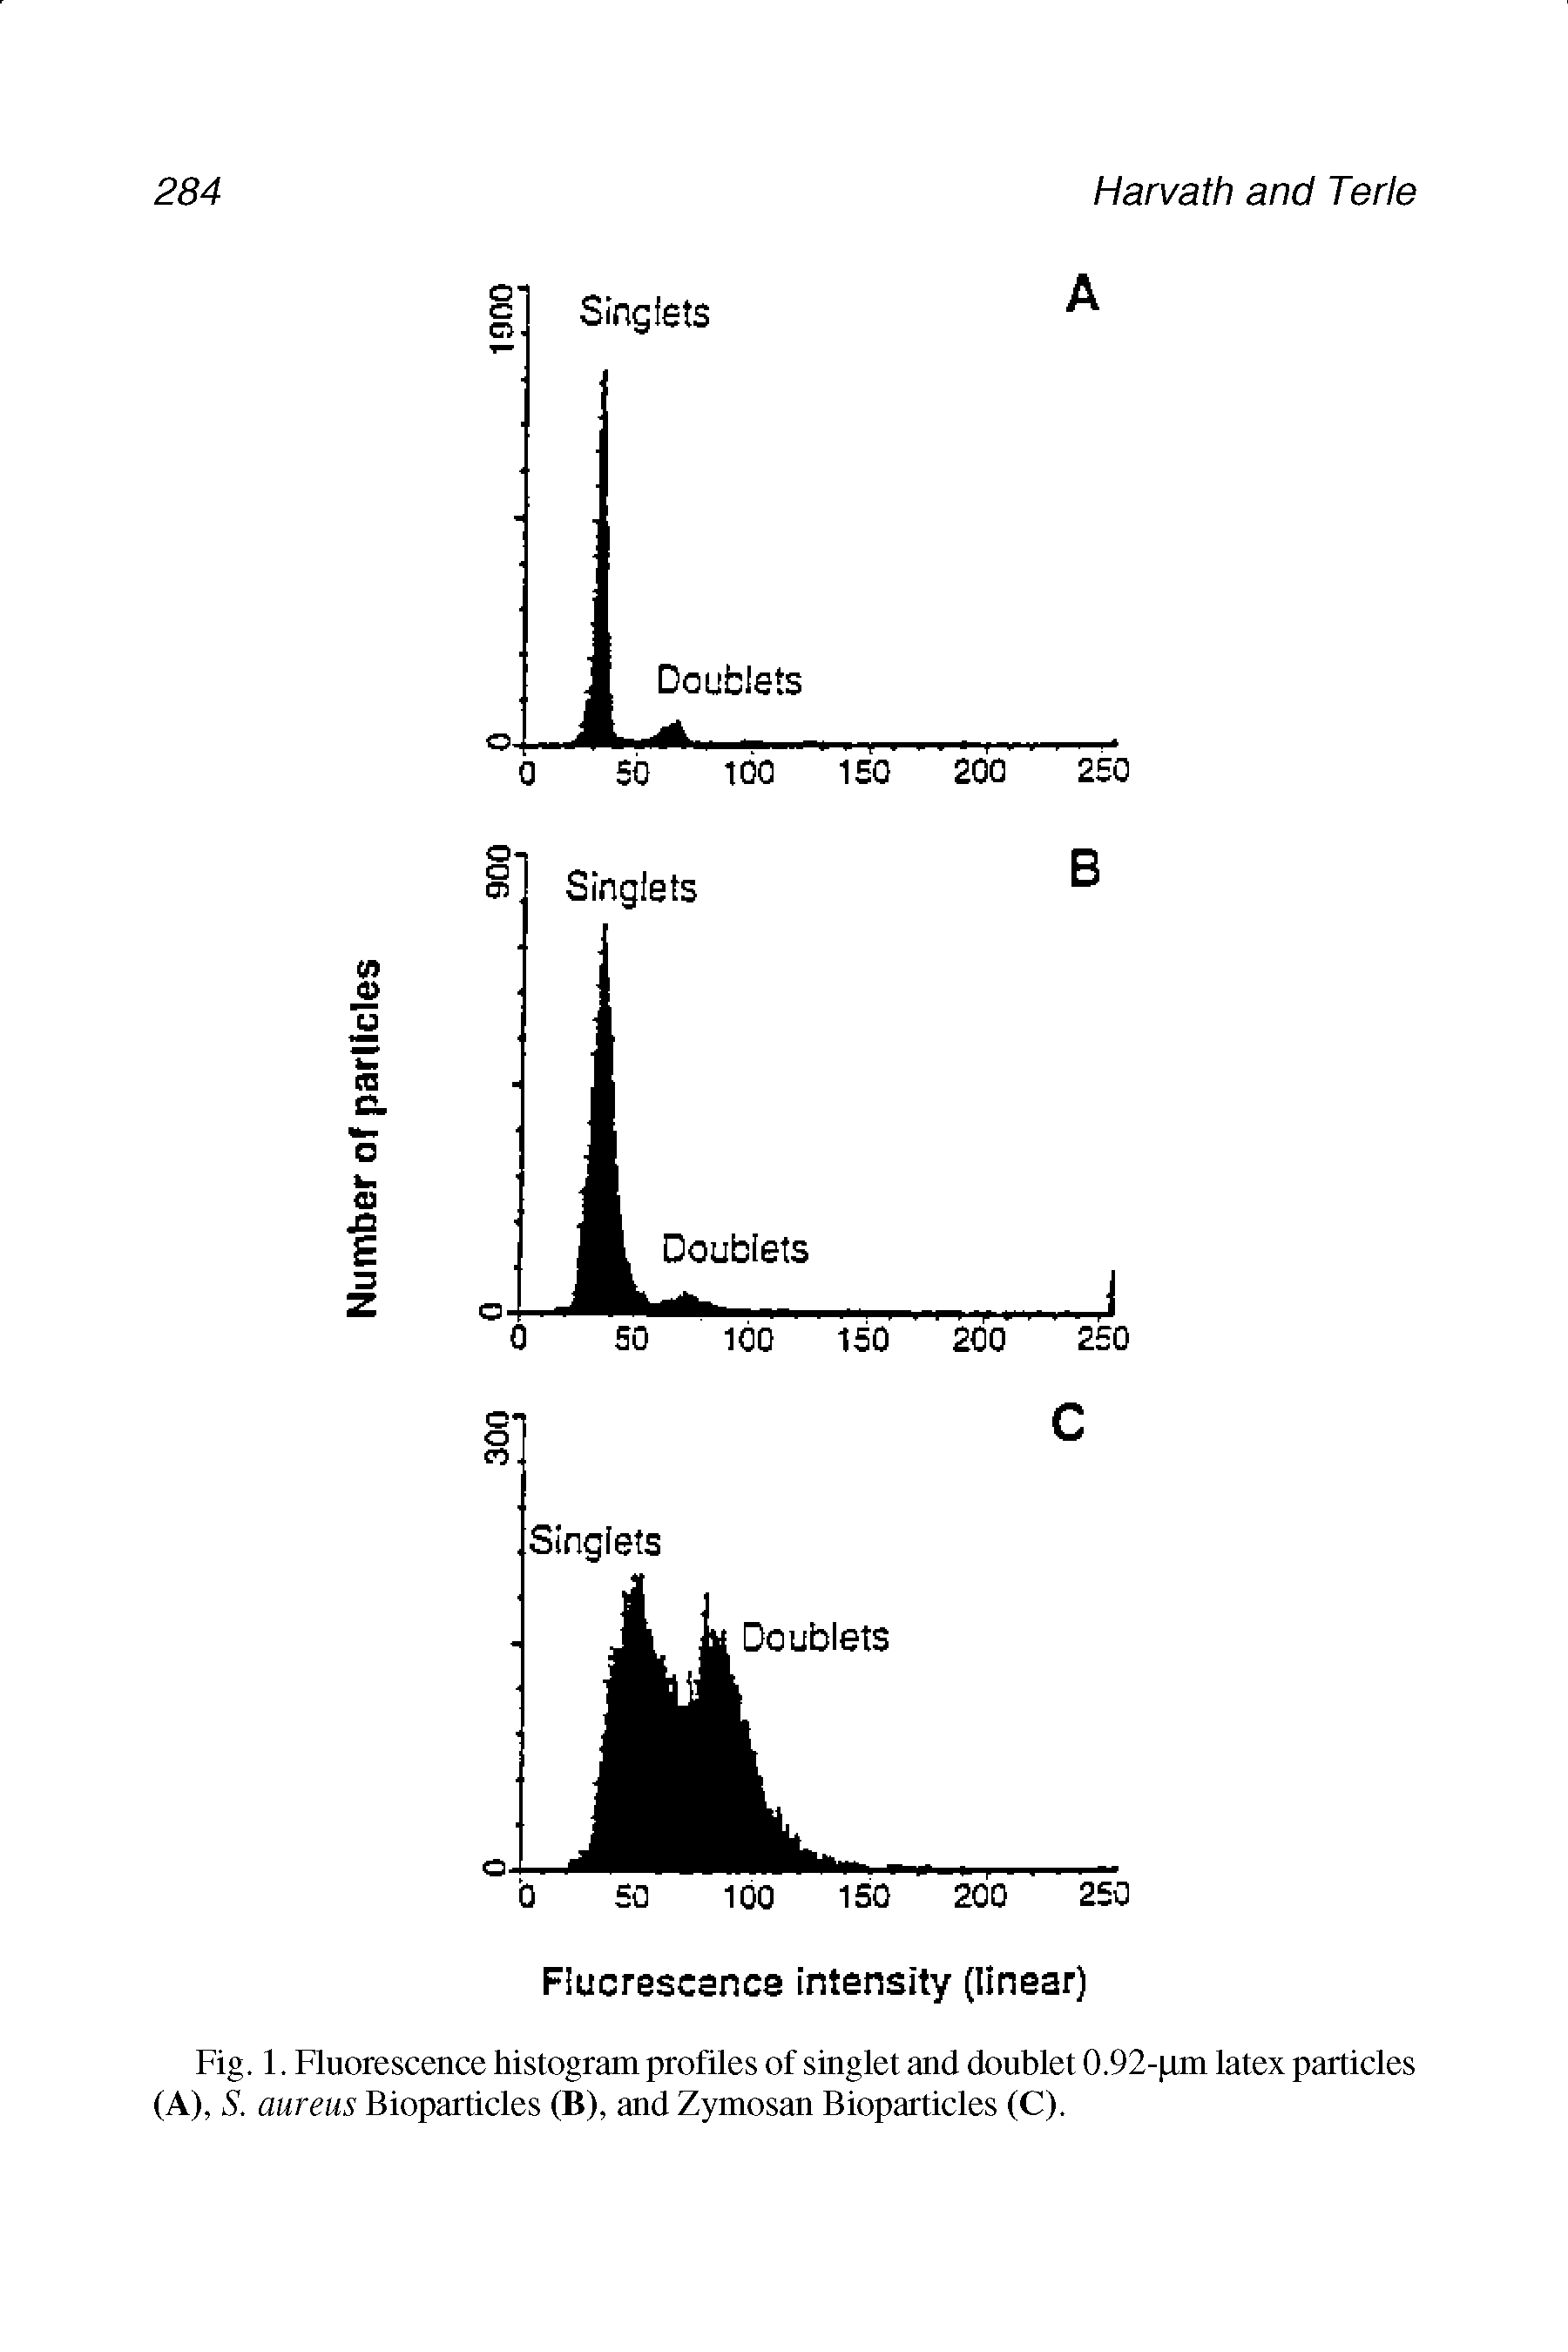 Fig. 1. Fluorescence histogram profiles of singlet and doublet 0.92-pm latex particles (A), S. aureus Bioparticles (B), and Zymosan Bioparticles (C).